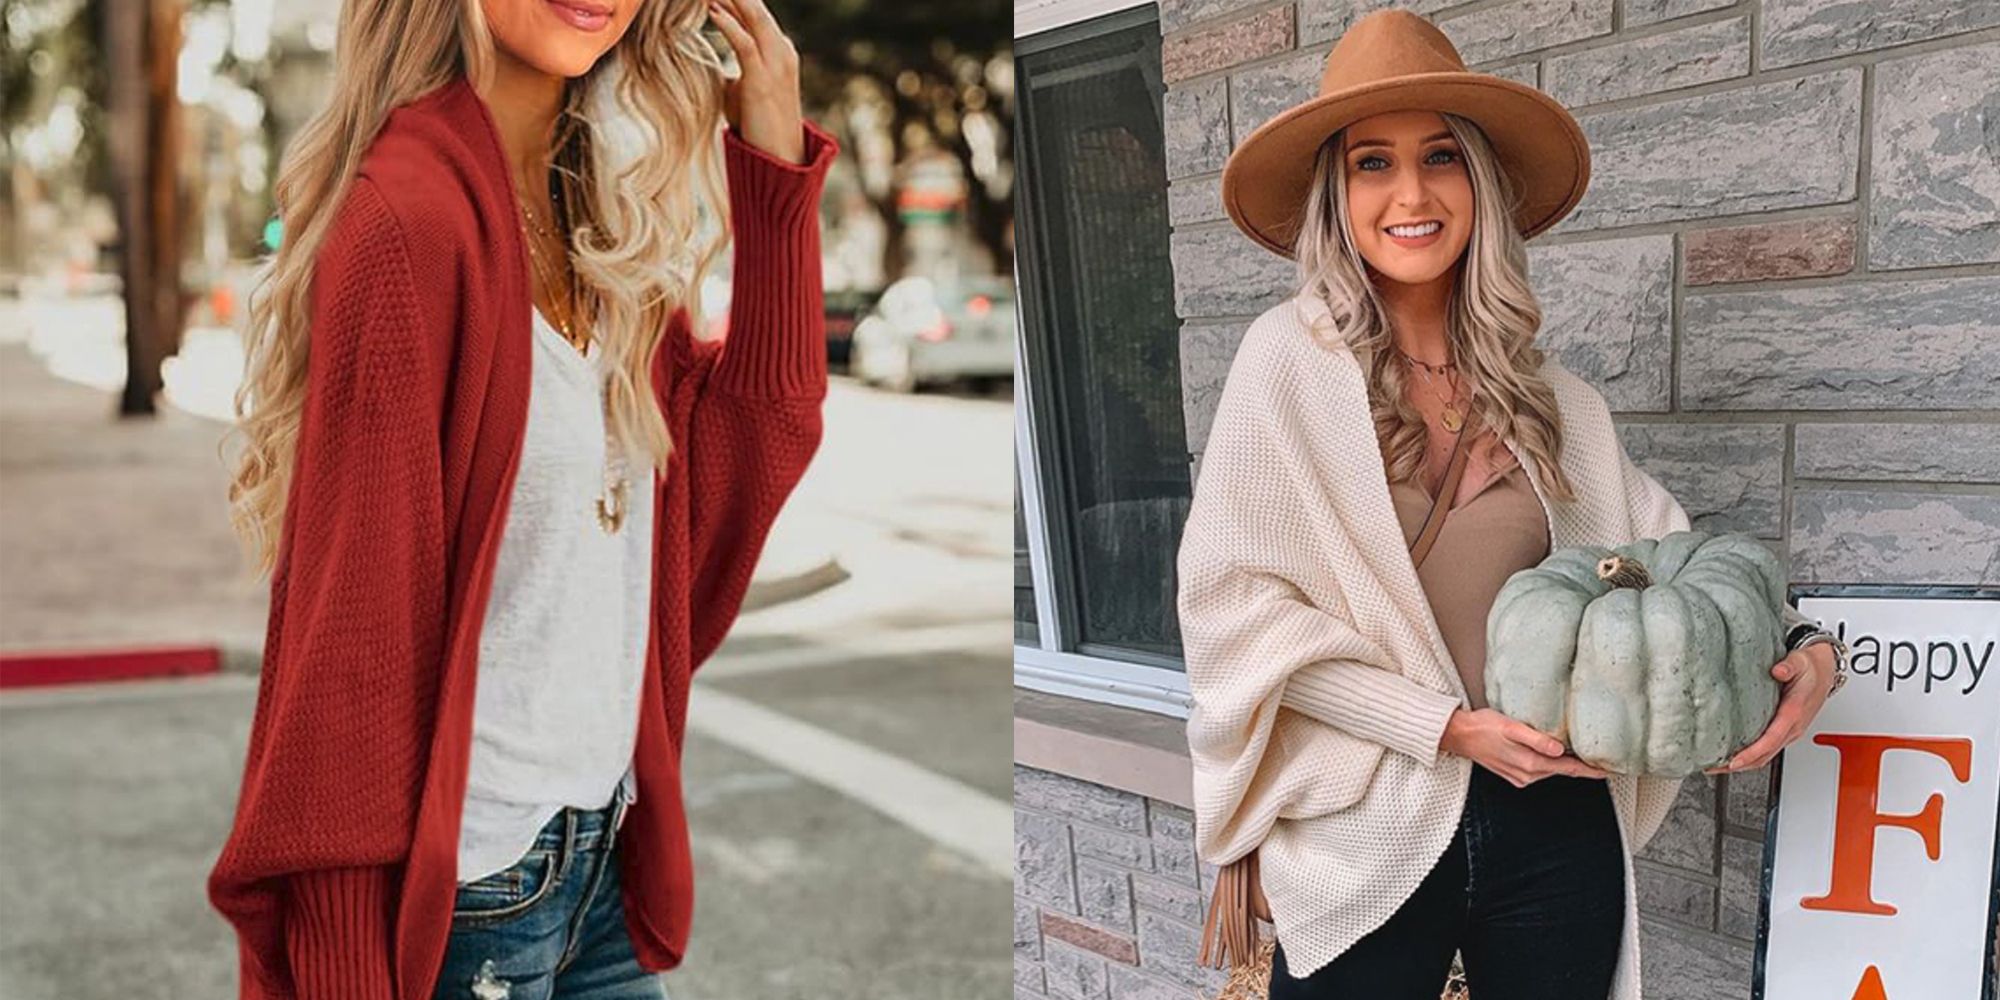 10 Look Ideas That Are Perfect Fall Church Outfits - MY CHIC OBSESSION